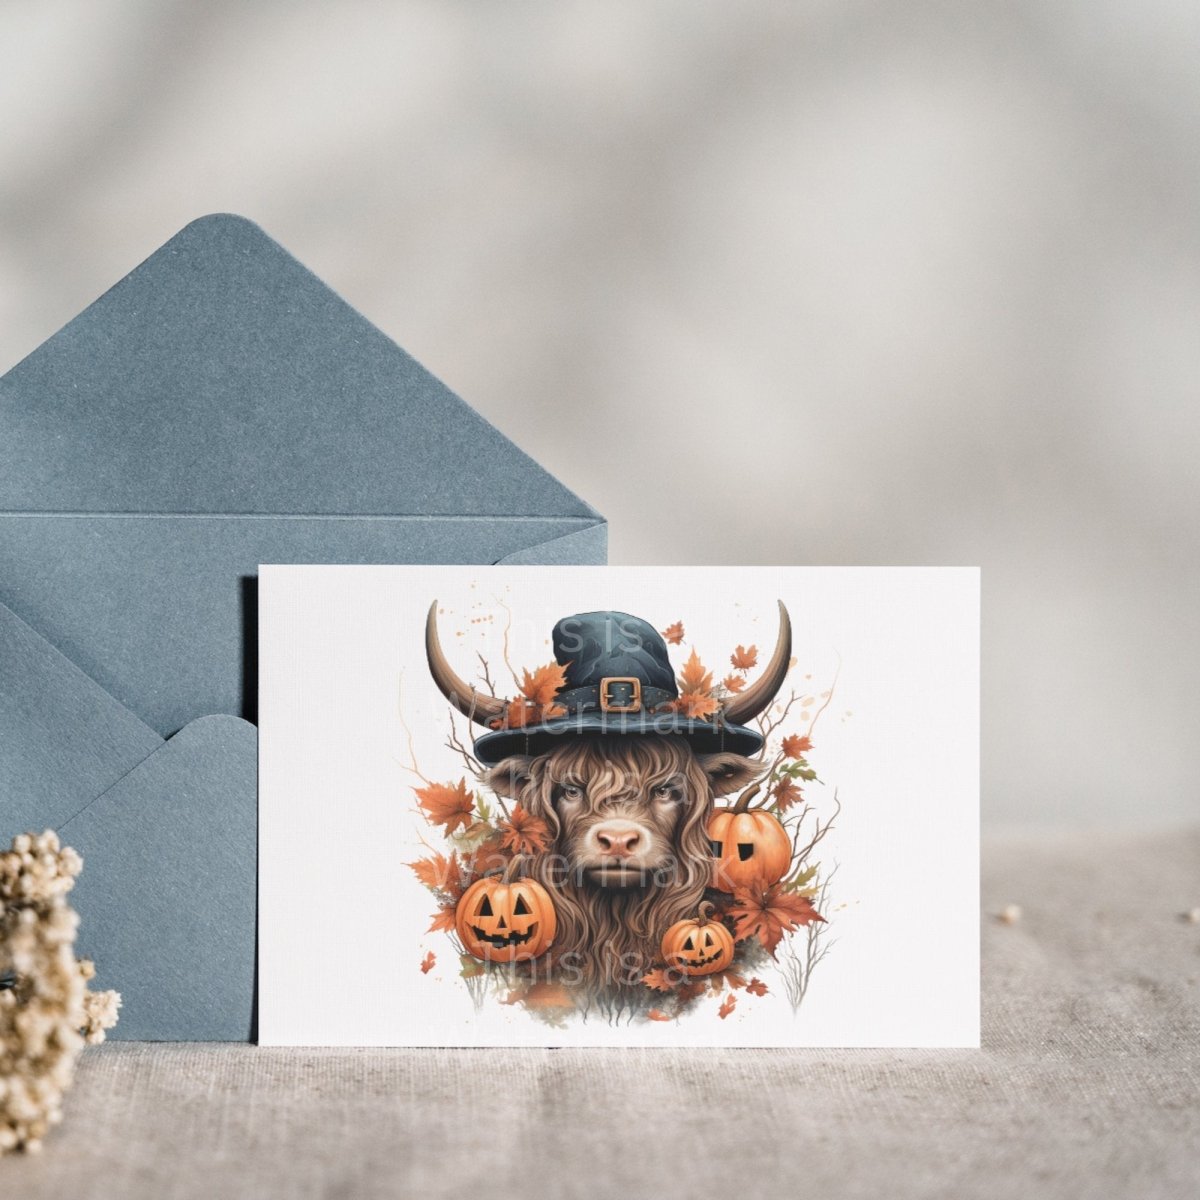 Highland Cow Halloween Clipart 7+7 PNG JPG Bundle Cute Design Invitation Card Graphic Paper Crafting Autumn Highland Cow Artwork - Everything Pixel